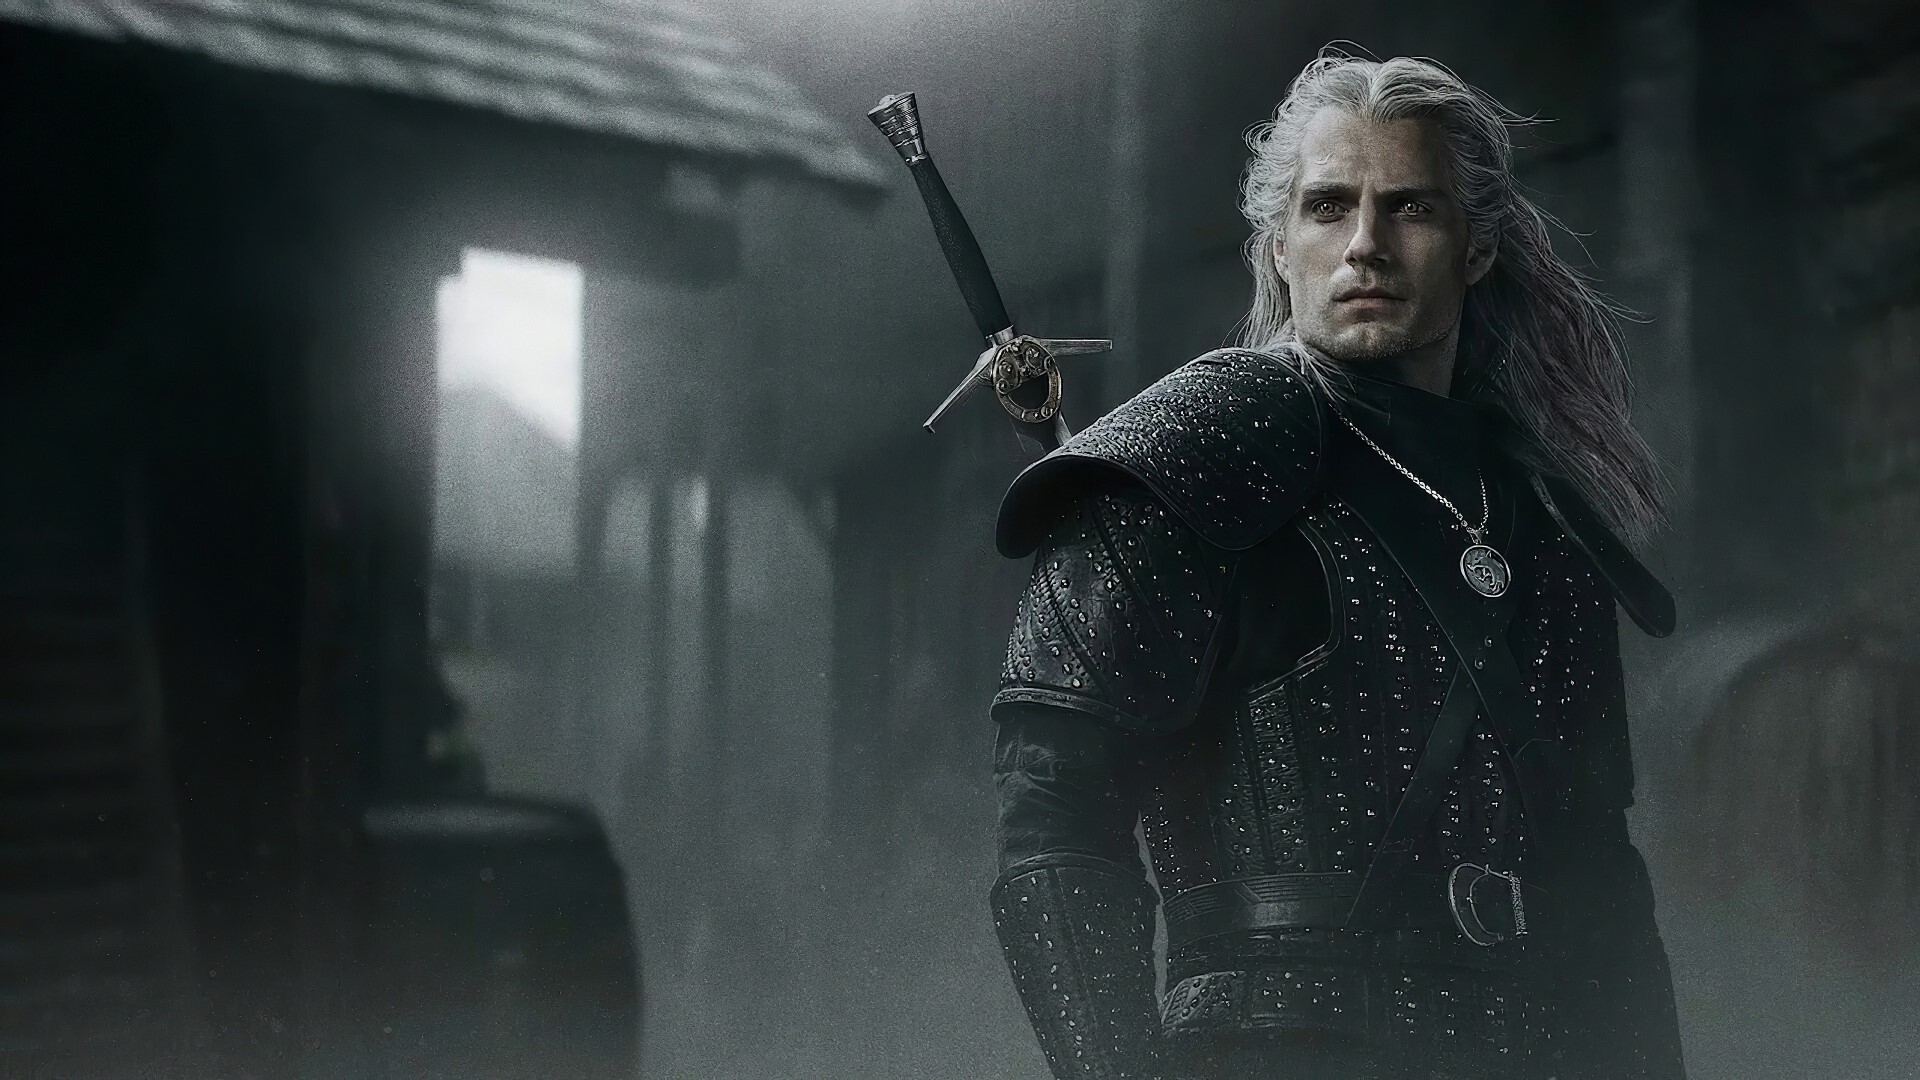 The Witcher Season 2: Netflix, Andrzej Sapkowski serves as a creative consultant on the show. 1920x1080 Full HD Wallpaper.